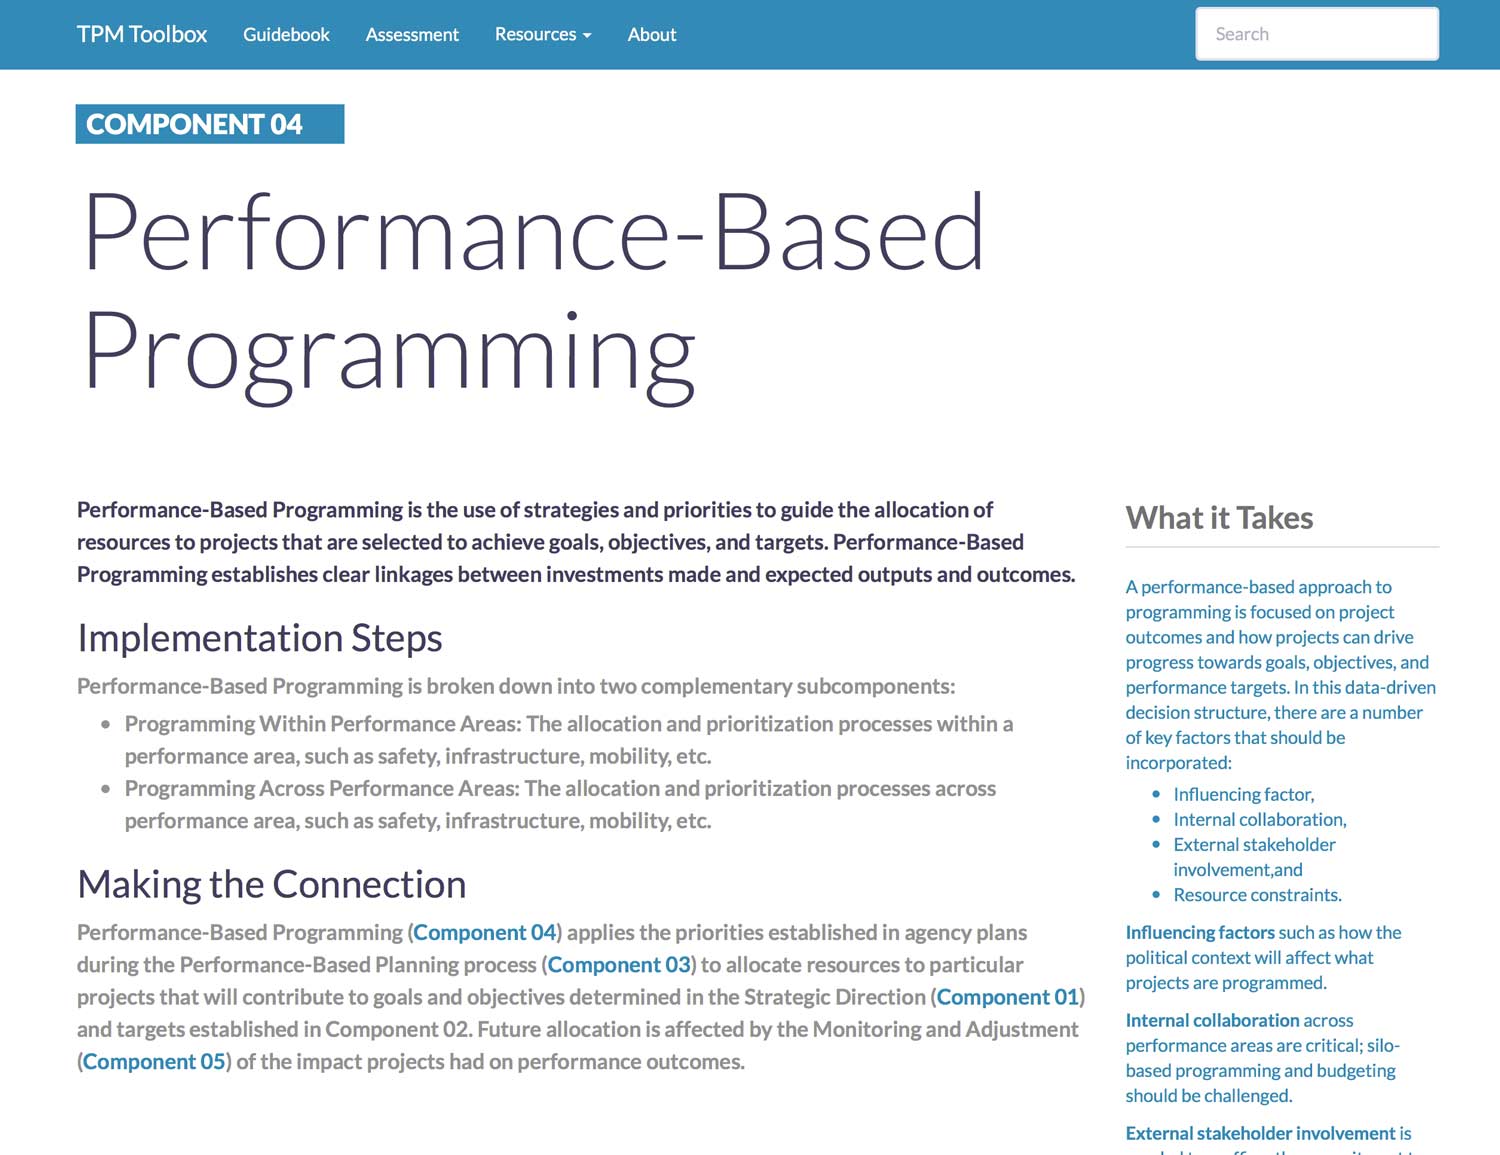 Thumbnail image of Component 04 Summary webpage. Performance-Based Programming is the use of strategies and priorities to guide the allocation of resources to projects that are selected to achieve goals, objectives, and targets.